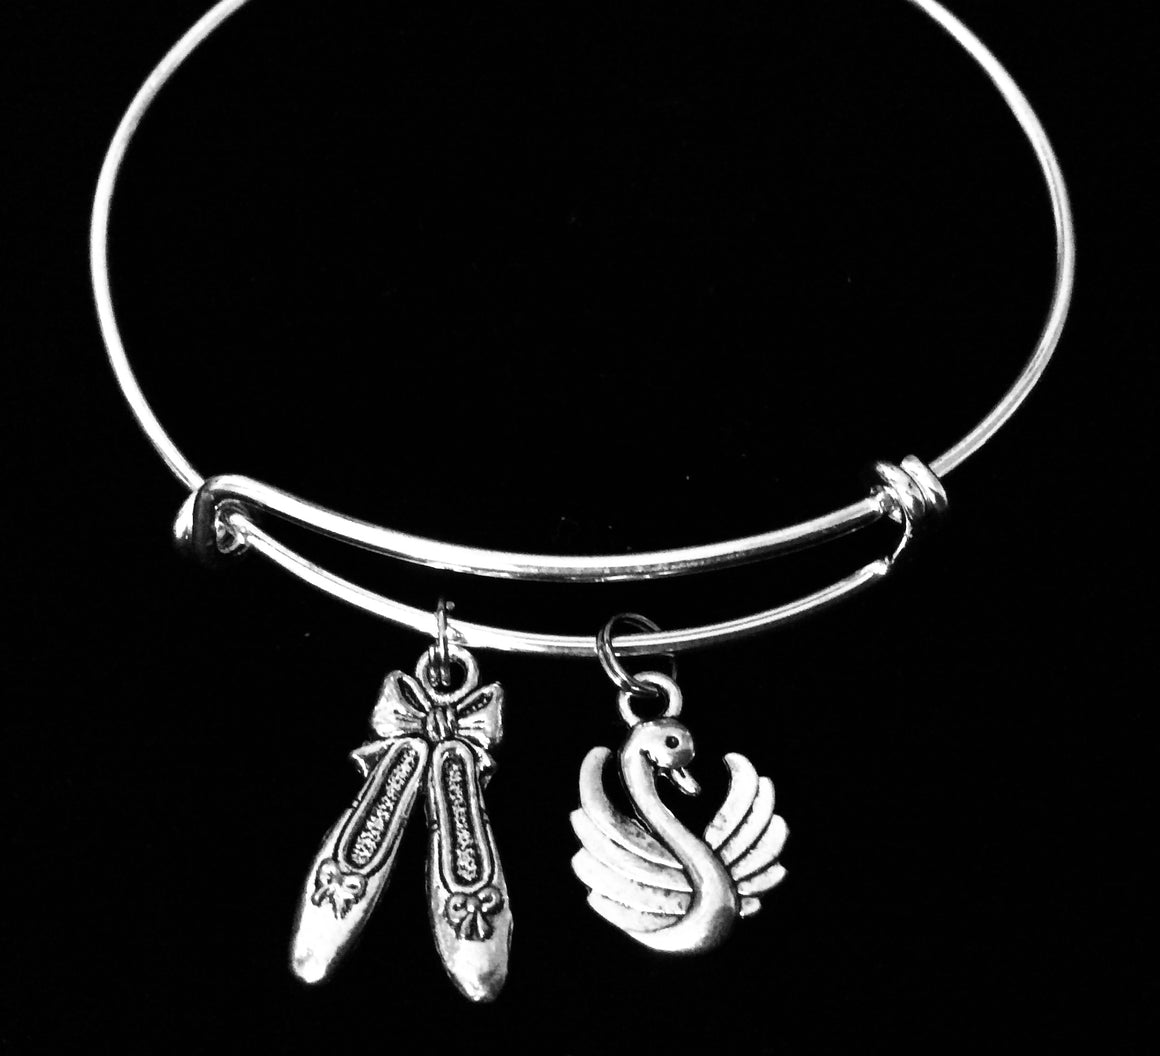 Ballerina Shoes and Swan Expandable Charm Bracelet Adjustable Bangle One Size Fits All Gift